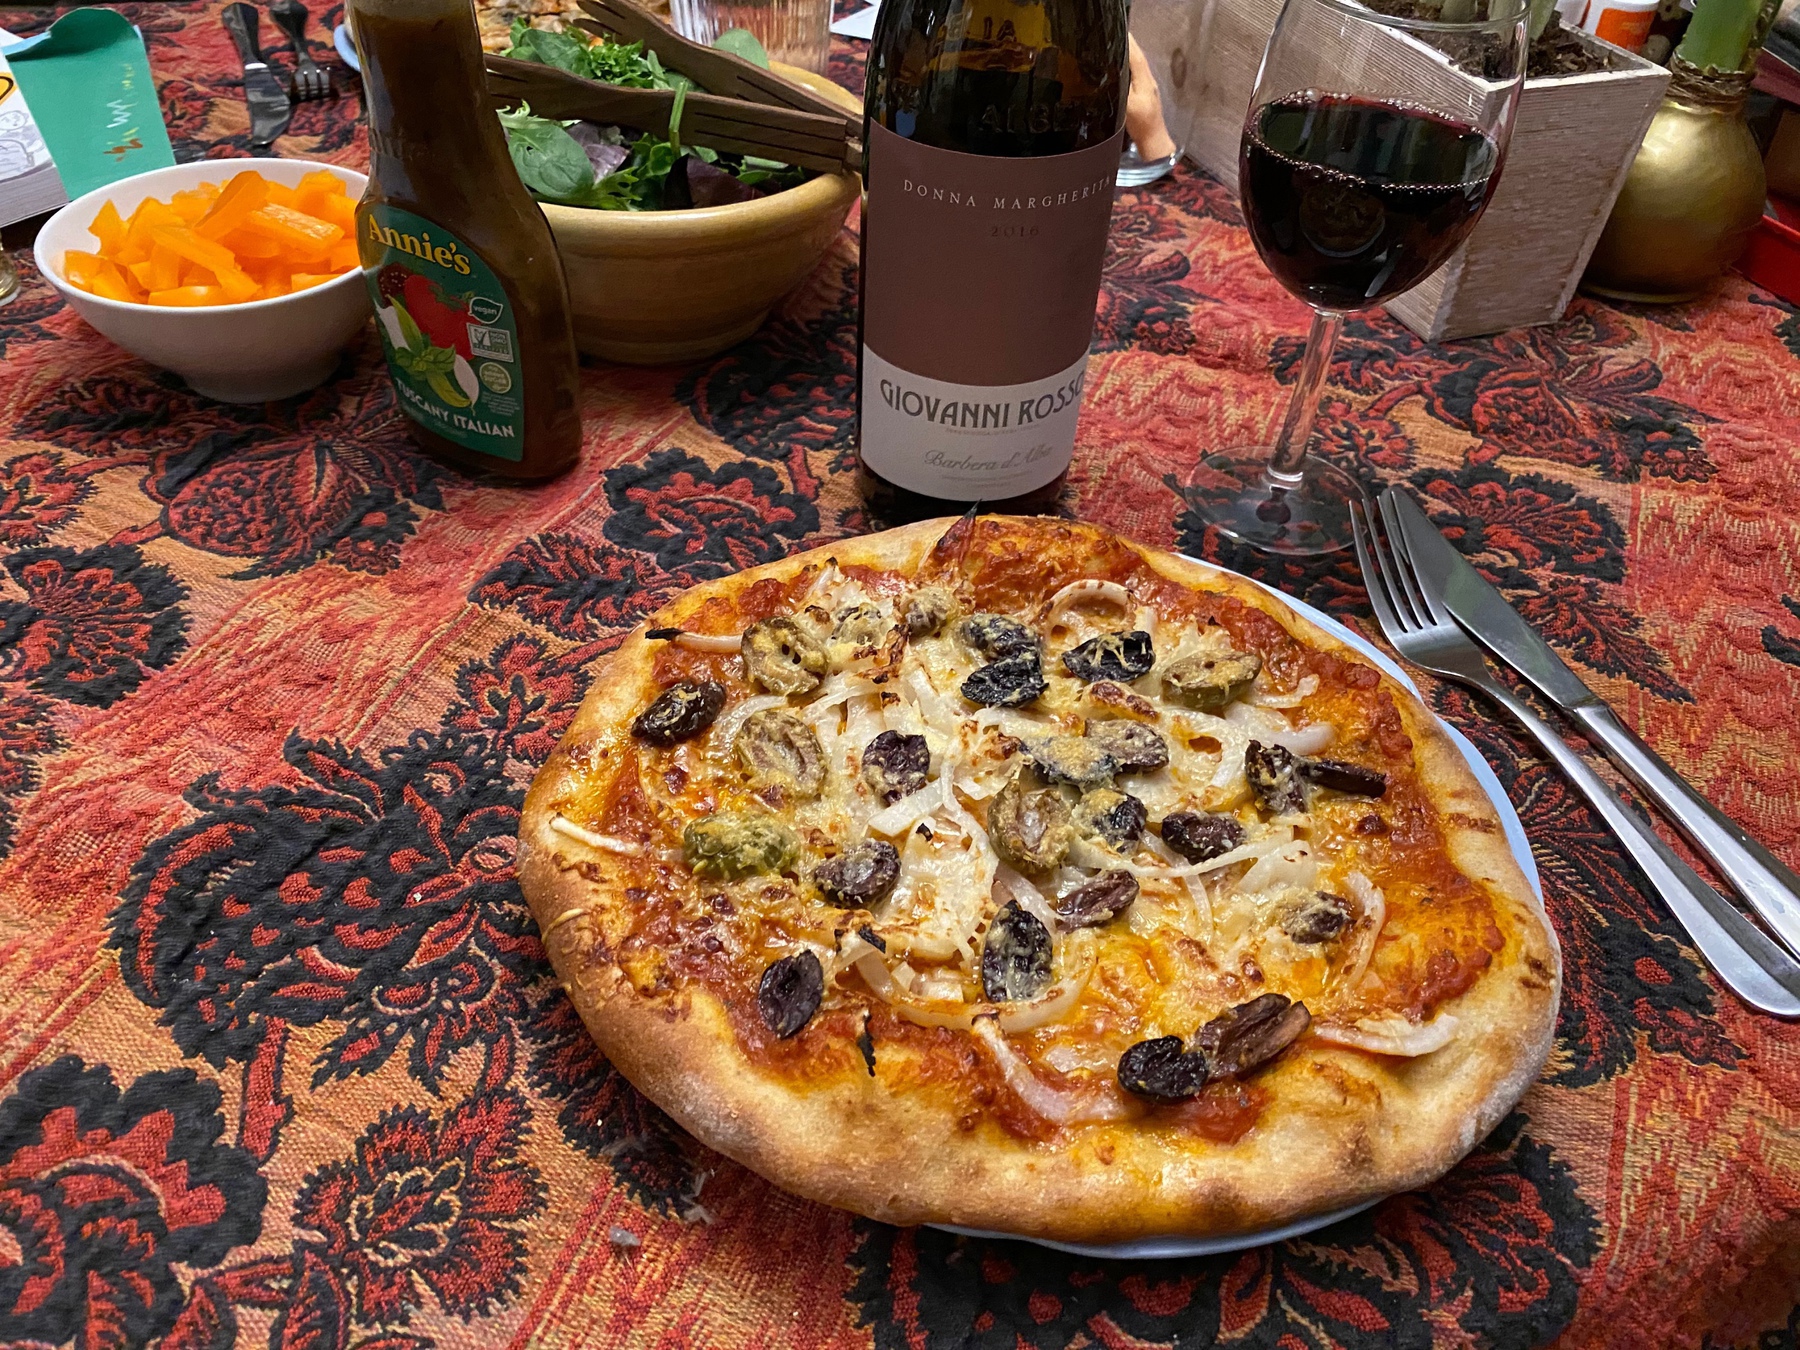 A small pizza on a plate with a glass of wine, a wine bottle, and a small salad in the background.